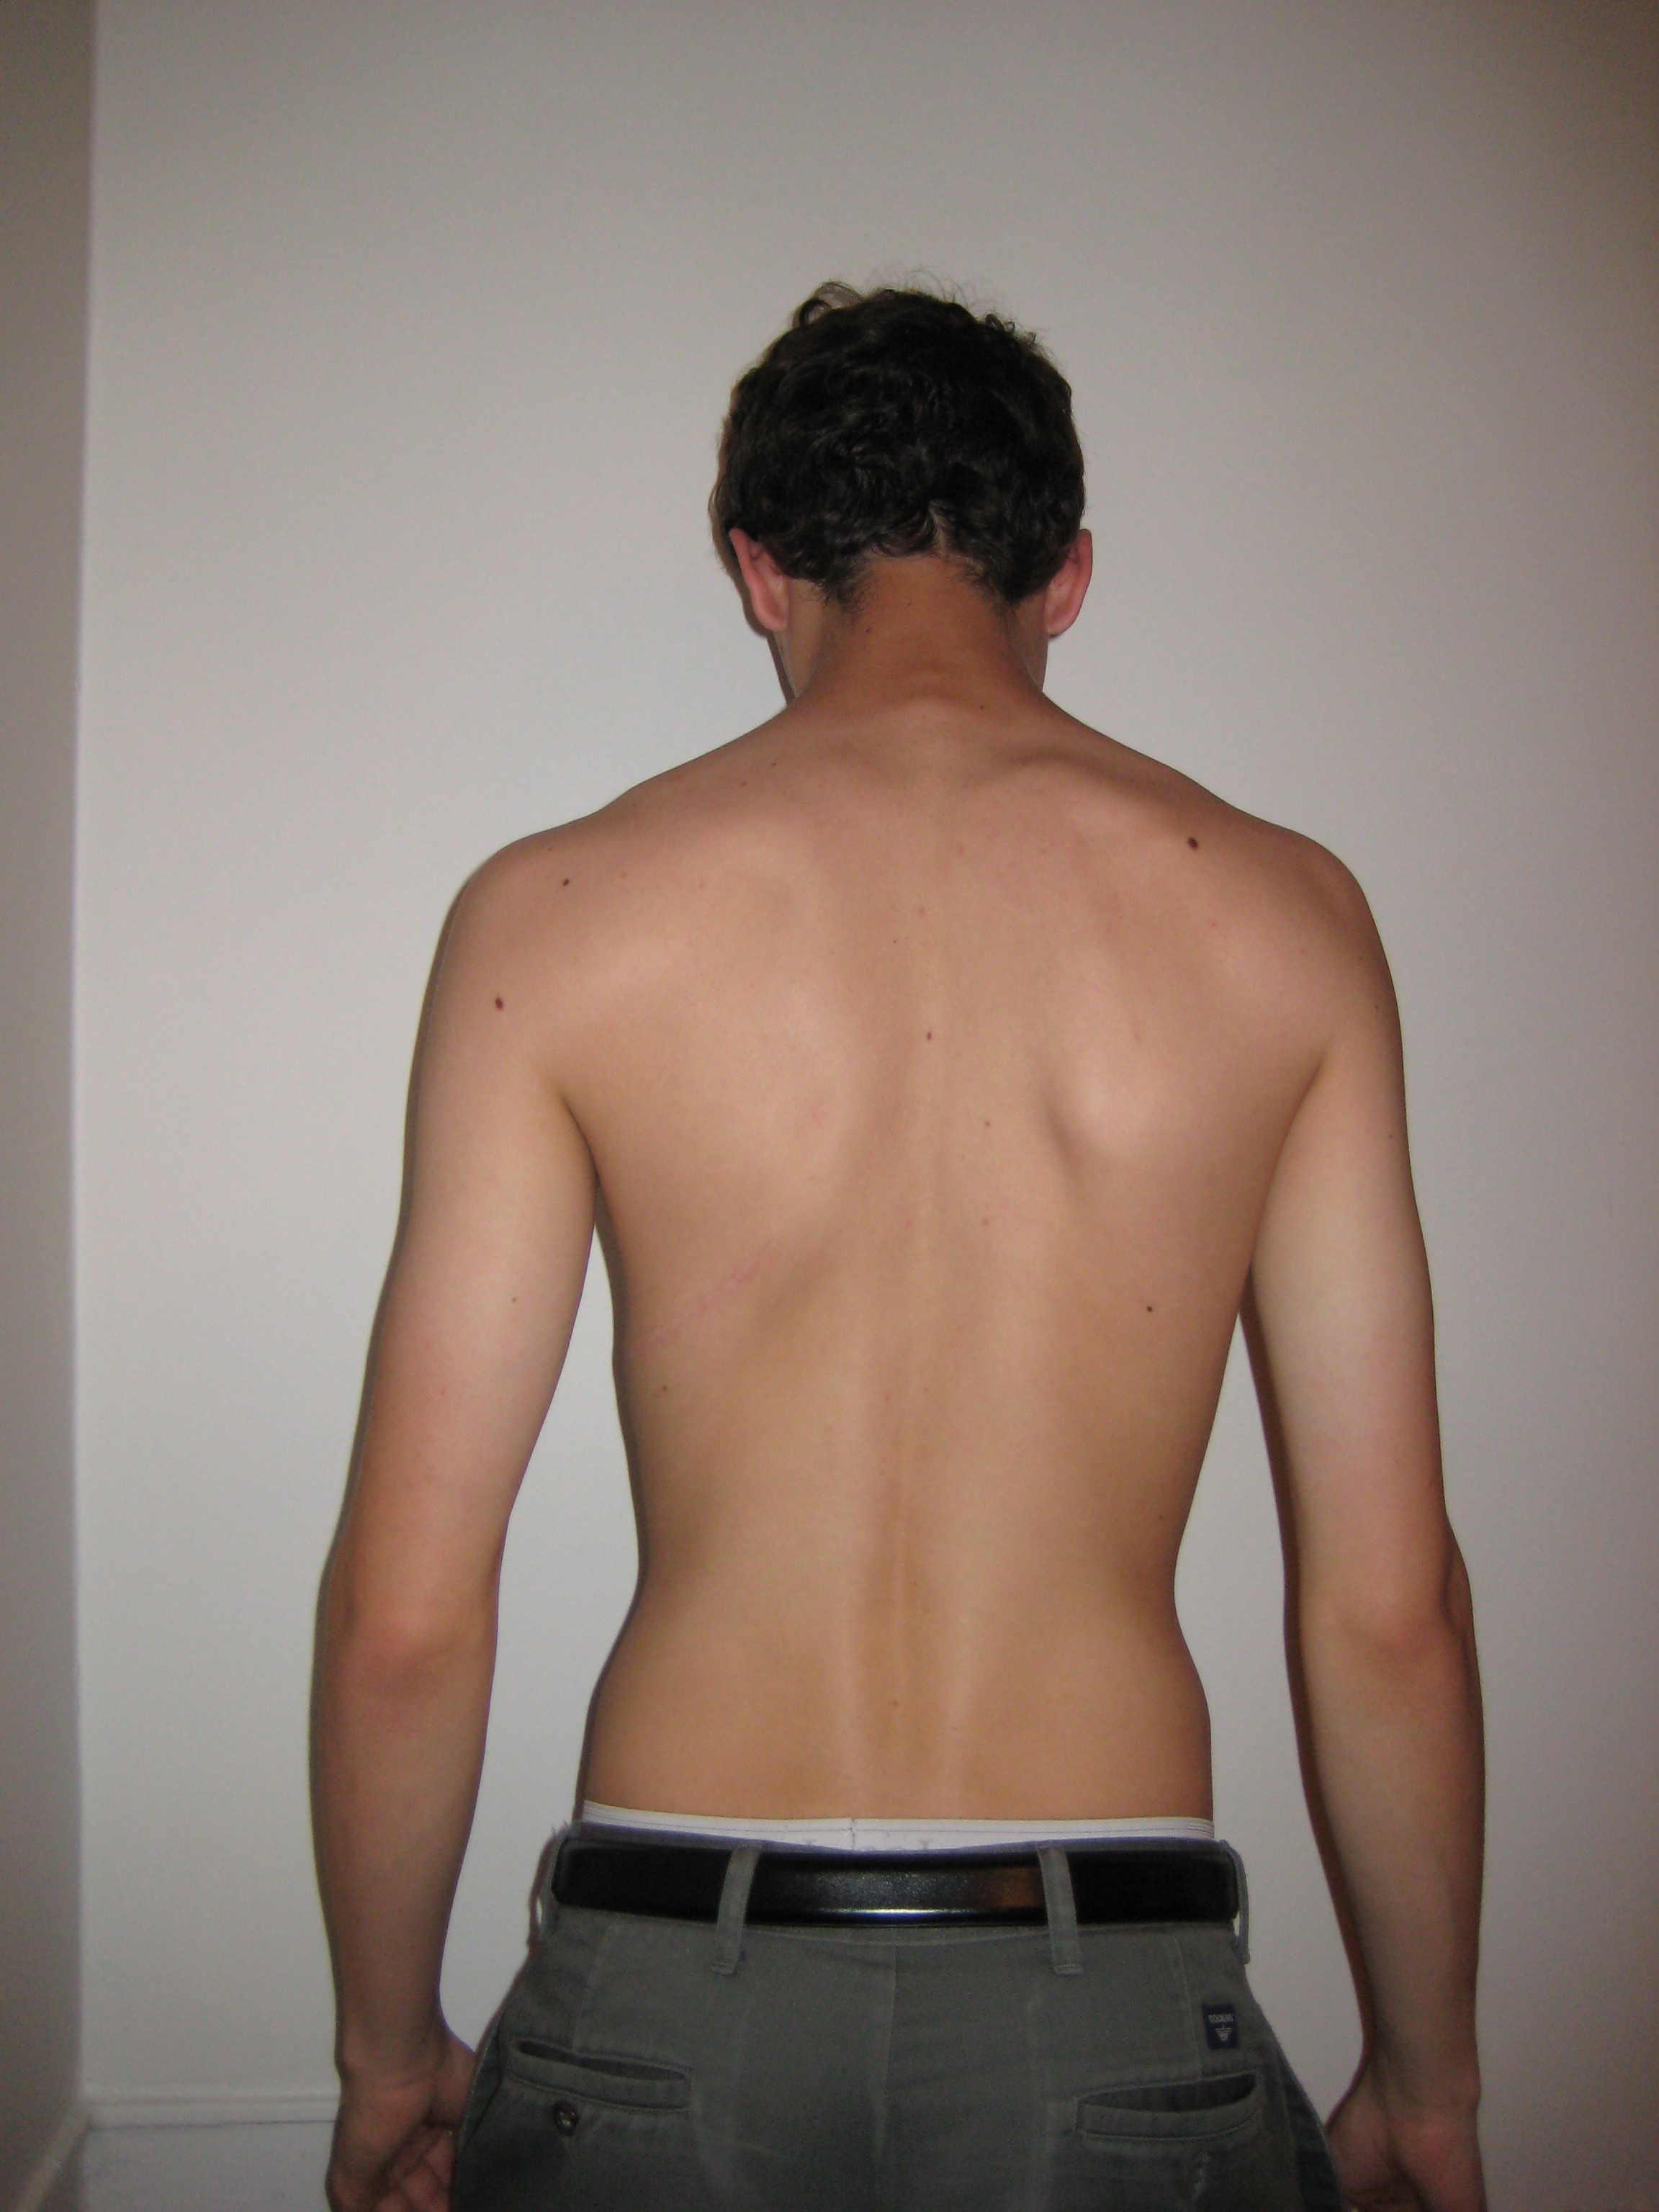 Stock___Male_Back_VIII_by_mousiestock